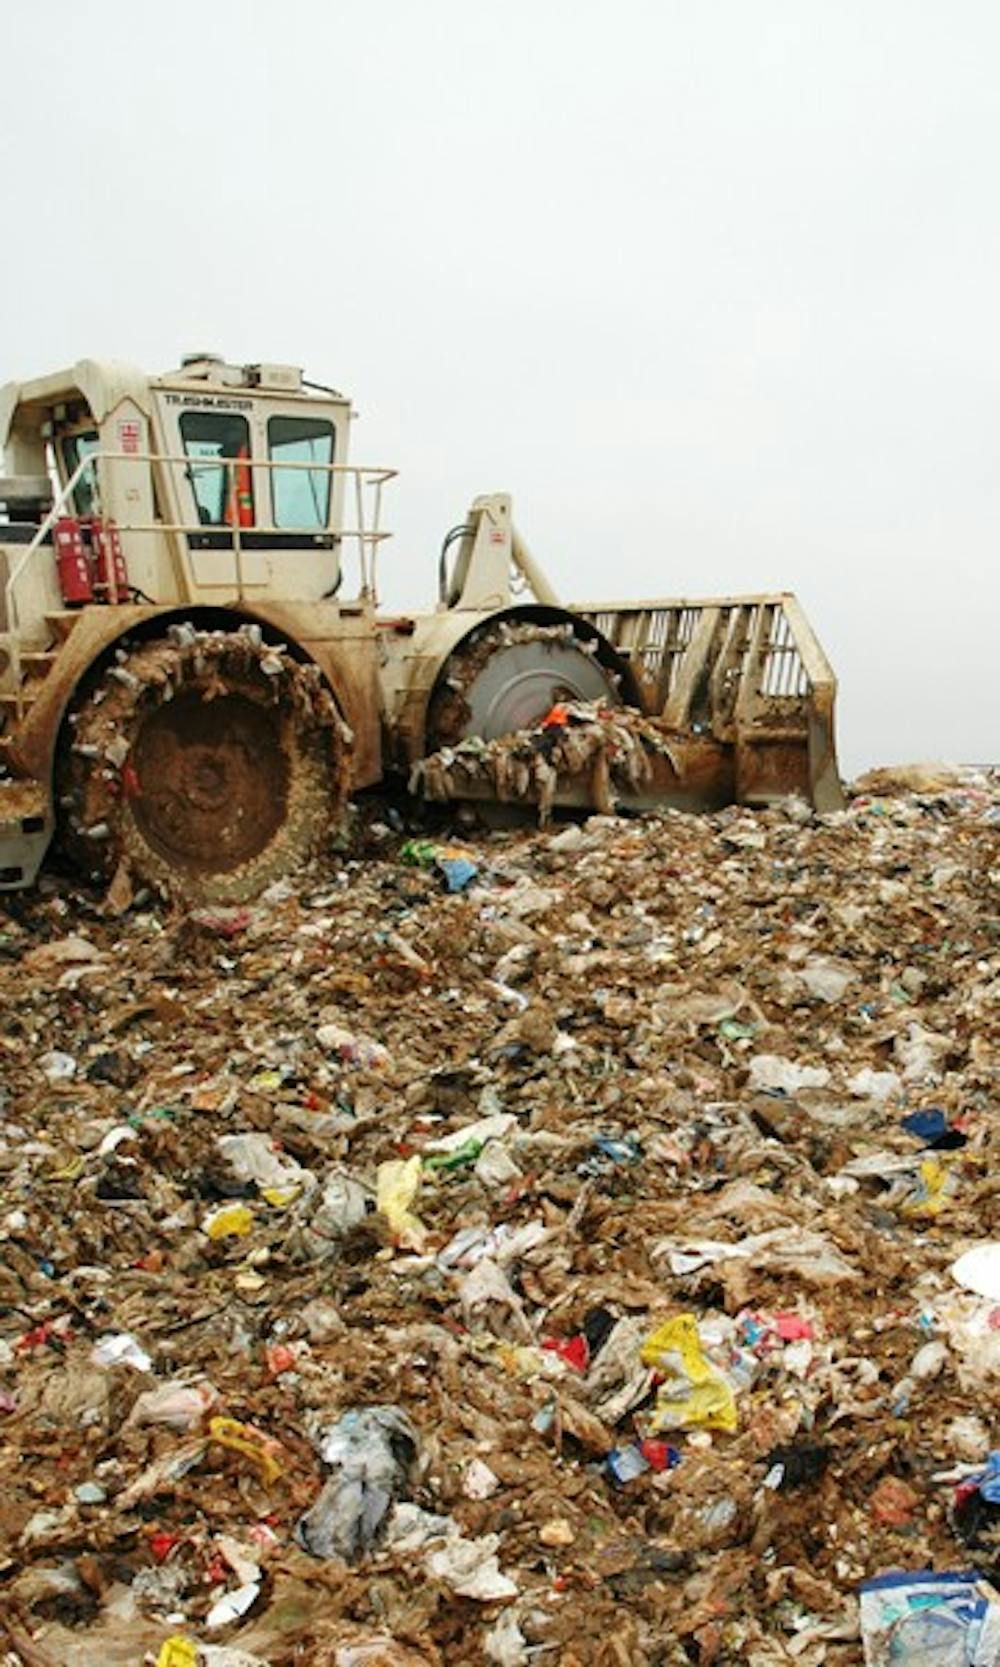 A trash compactor sits idle at the Orange County Landfill in February on Eubanks Road. DTH/Ben Pierce